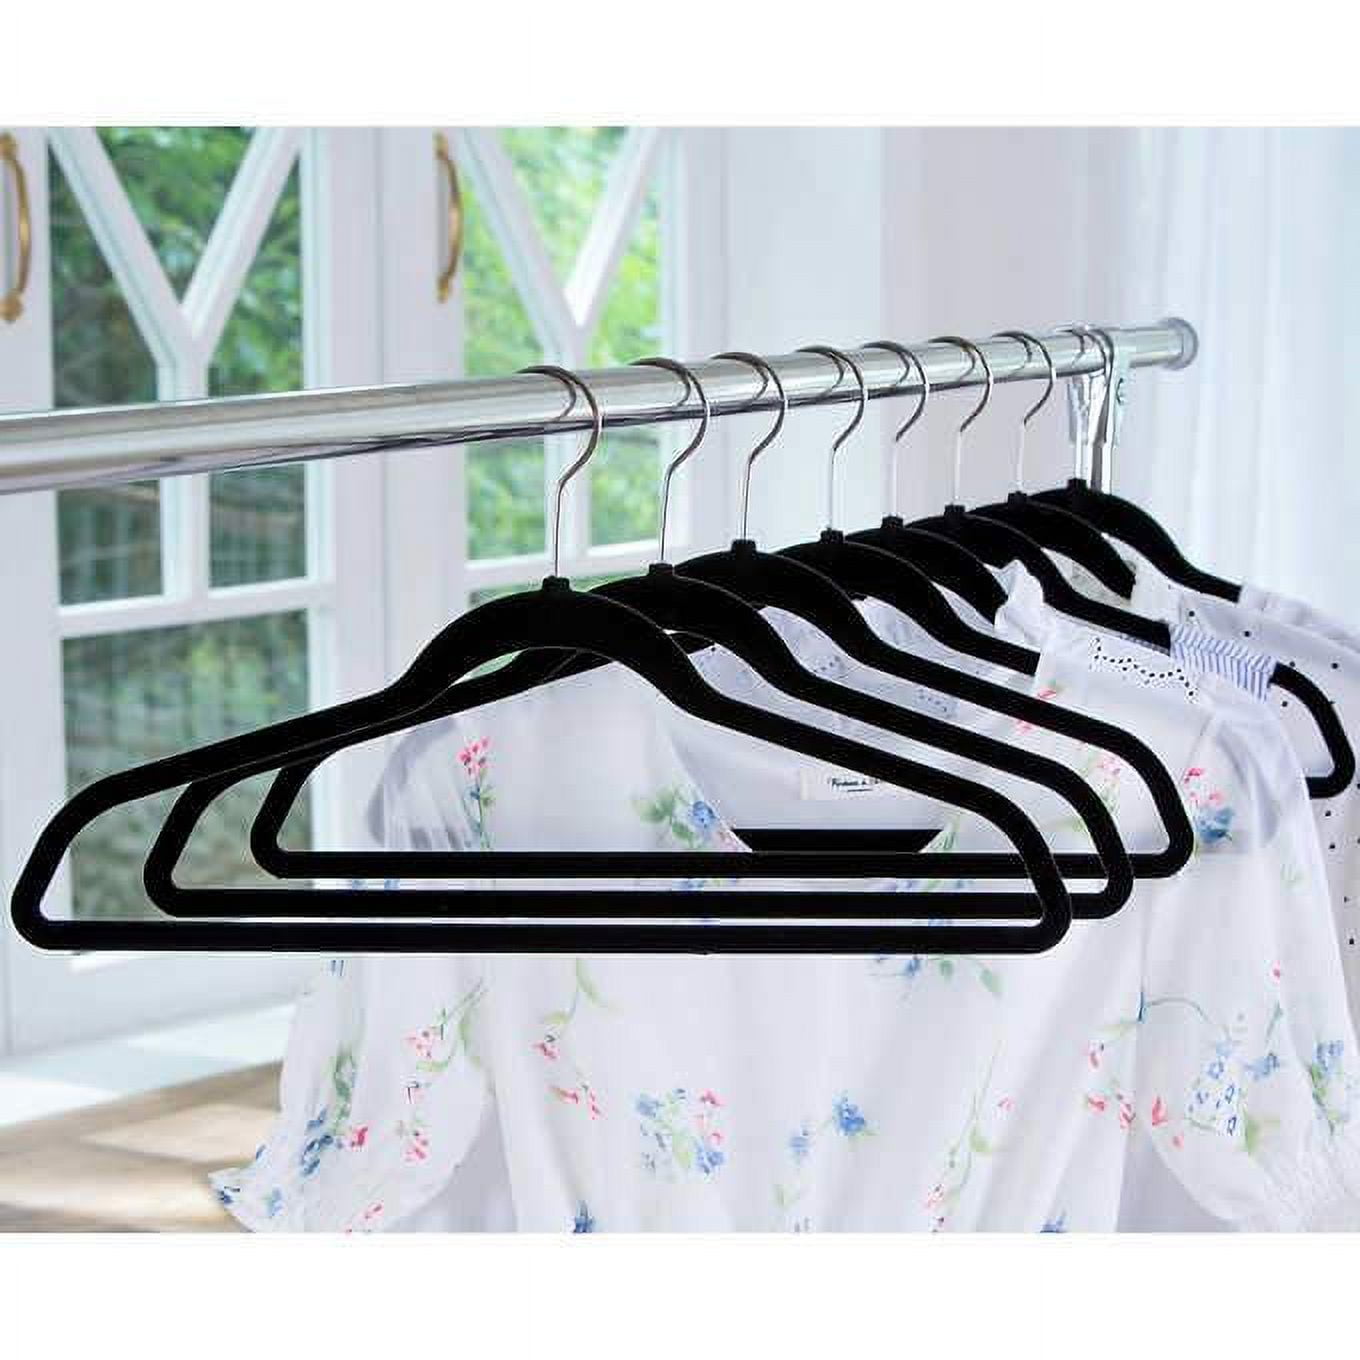 HOUSE DAY Adults Plastic Hangers 50 Pack Coat Hangers Black Adult Hangers  Non-Slip Space Saving Hangers L16.5 T1/4 - Red Dot Gift Trading